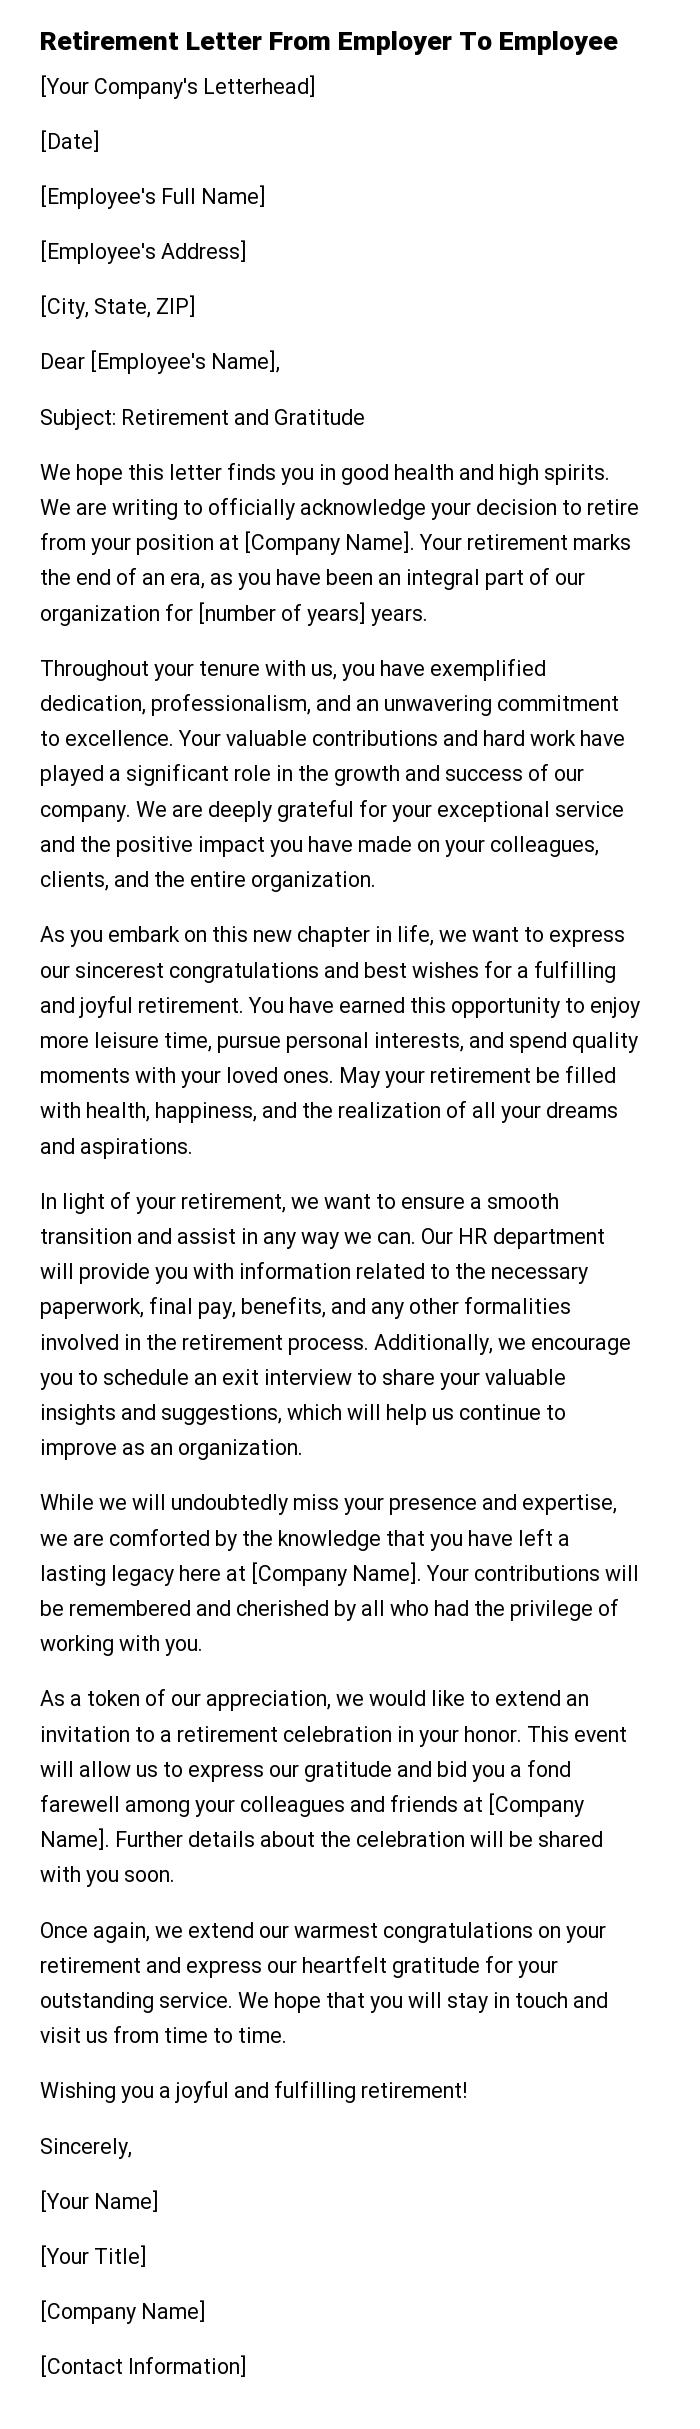 Retirement Letter From Employer To Employee